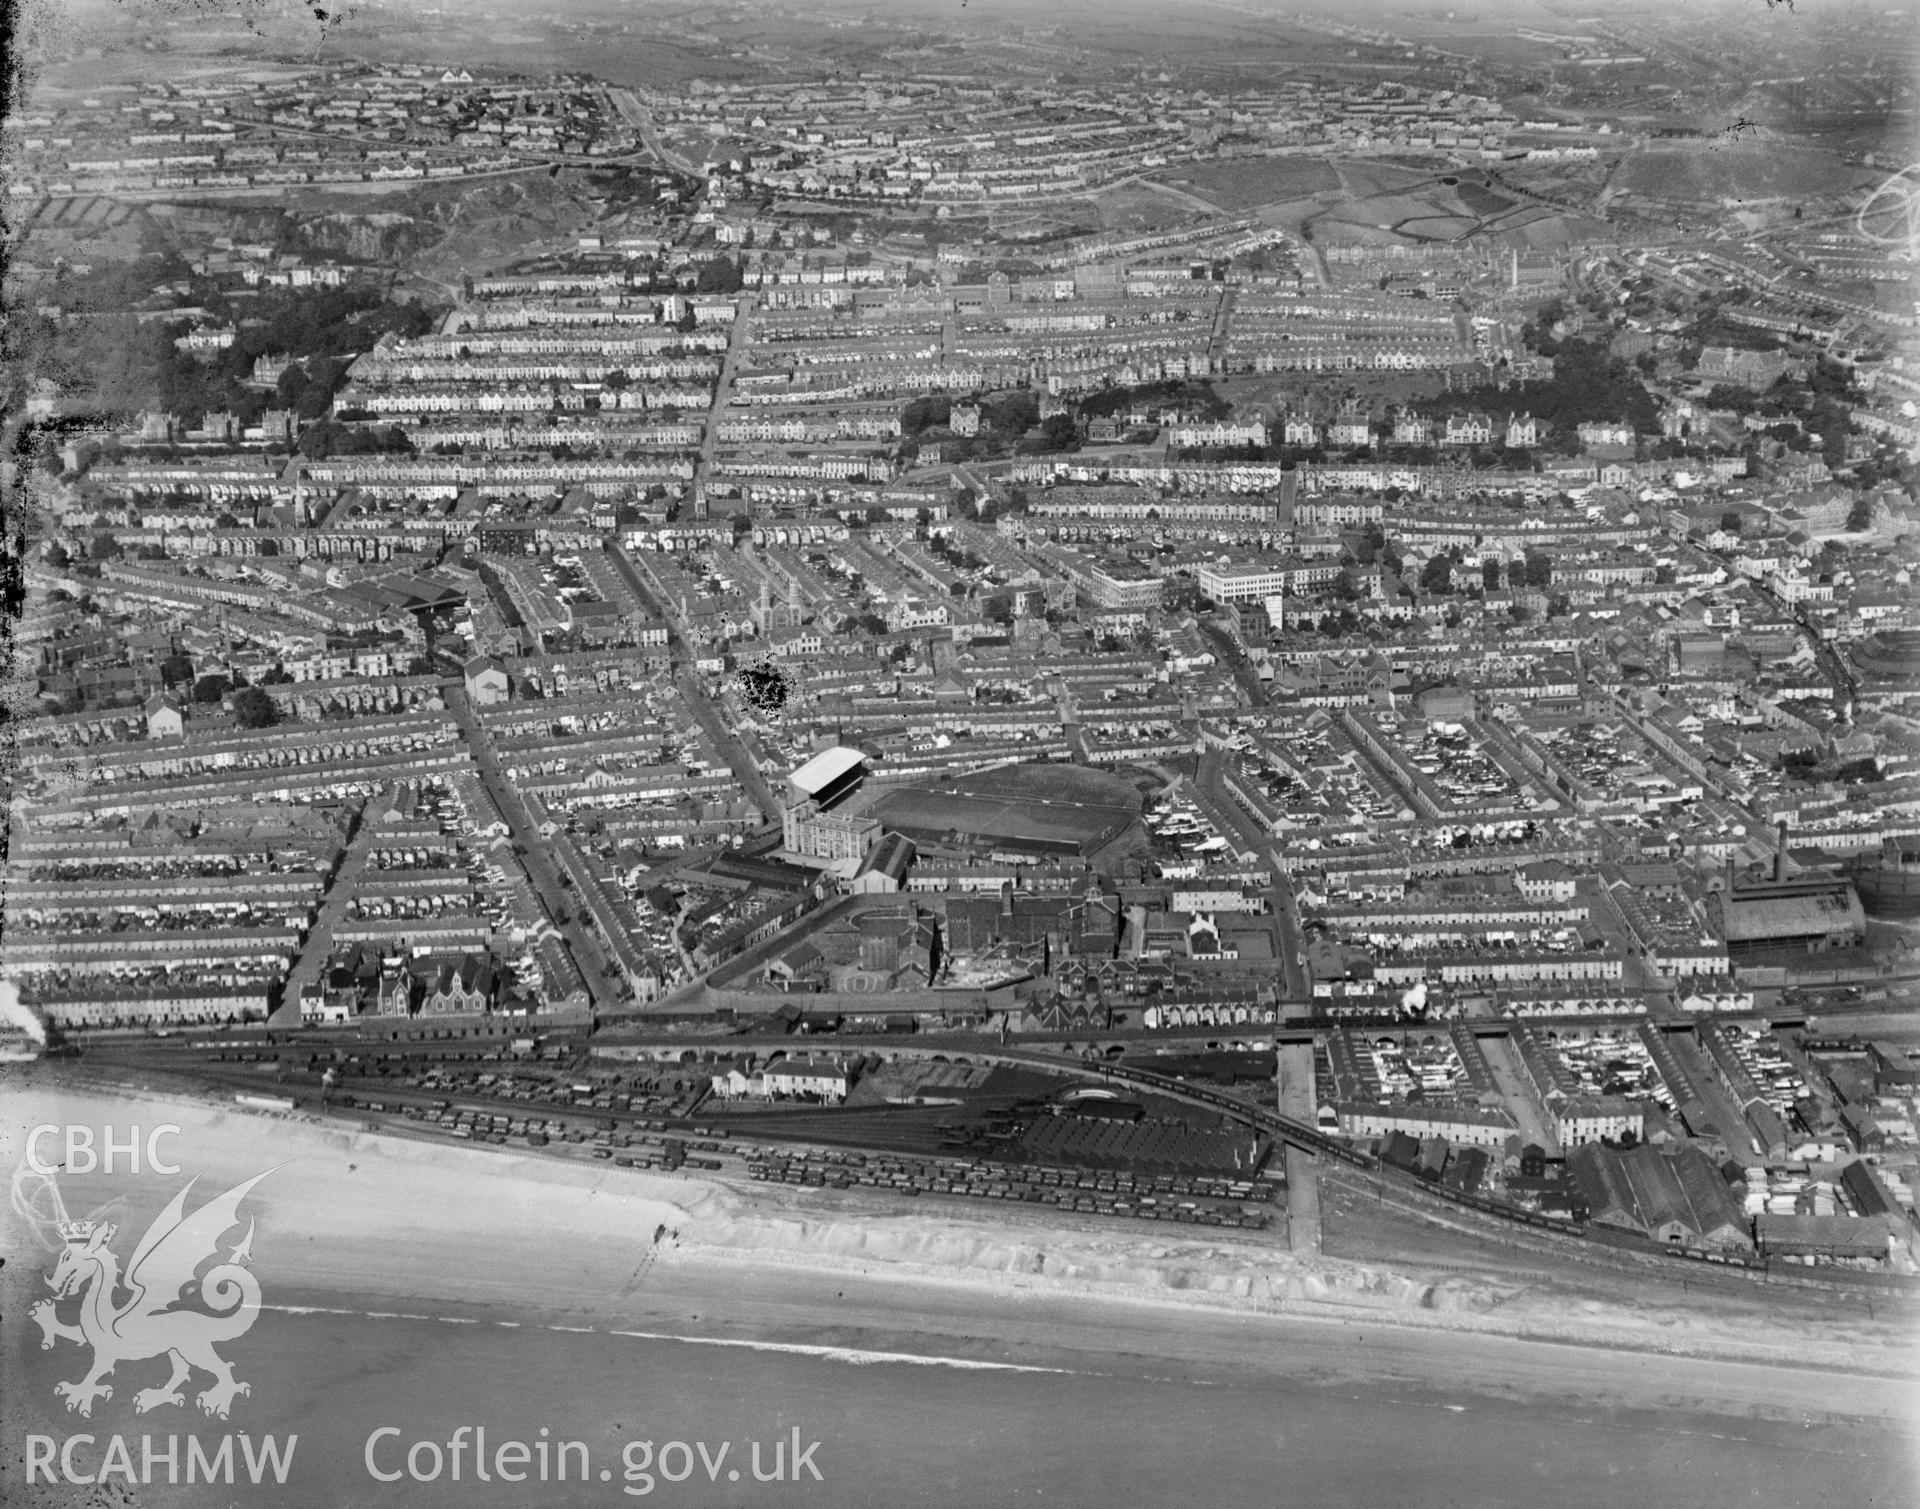 General view of Swansea, showing Vetch field, oblique aerial view. 5?x4? black and white glass plate negative.